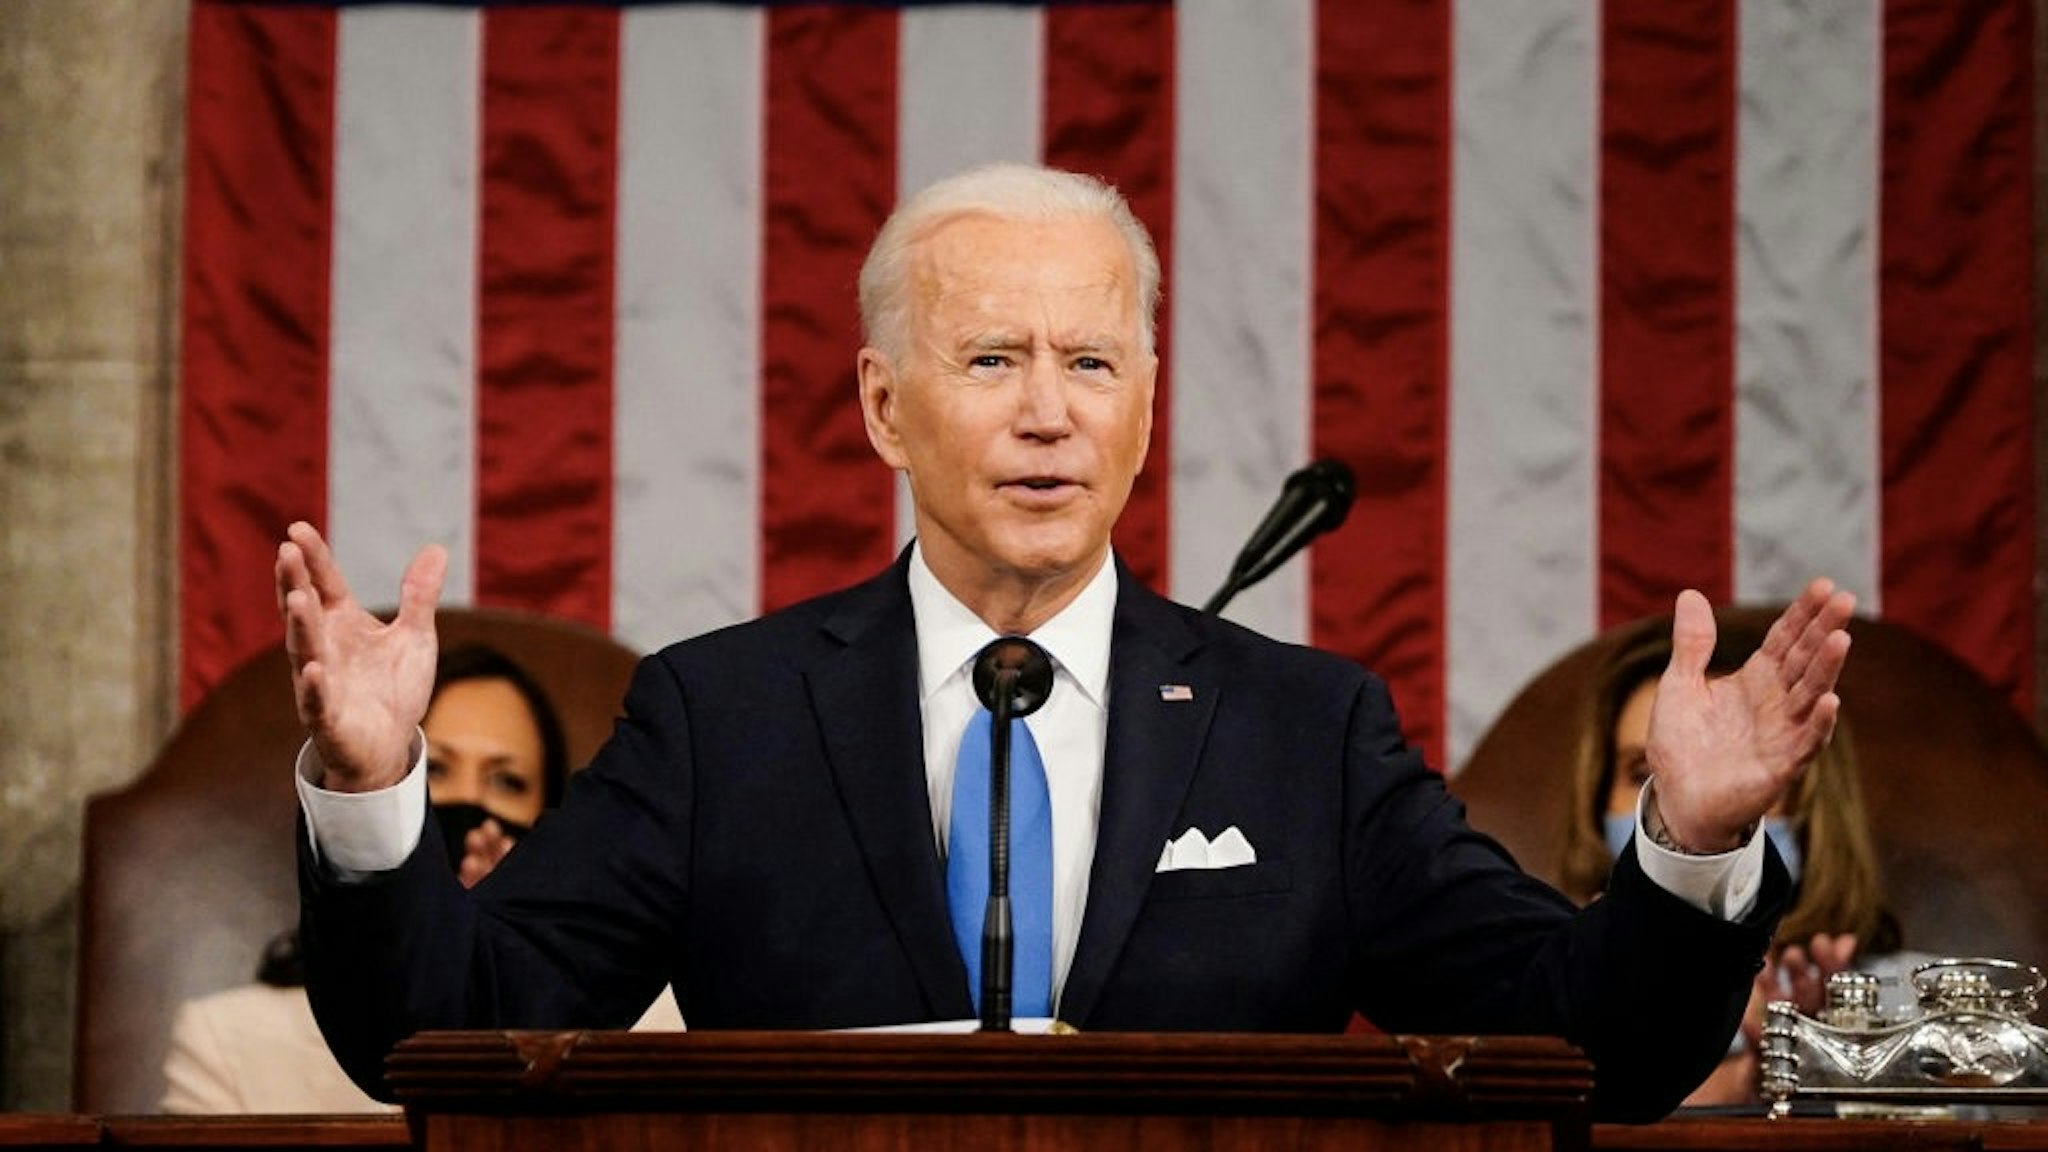 US-POLITICS-BIDEN US President Joe Biden addresses a joint session of Congress at the US Capitol in Washington, DC, on April 28, 2021. (Photo by Melina Mara / POOL / AFP) (Photo by MELINA MARA/POOL/AFP via Getty Images)